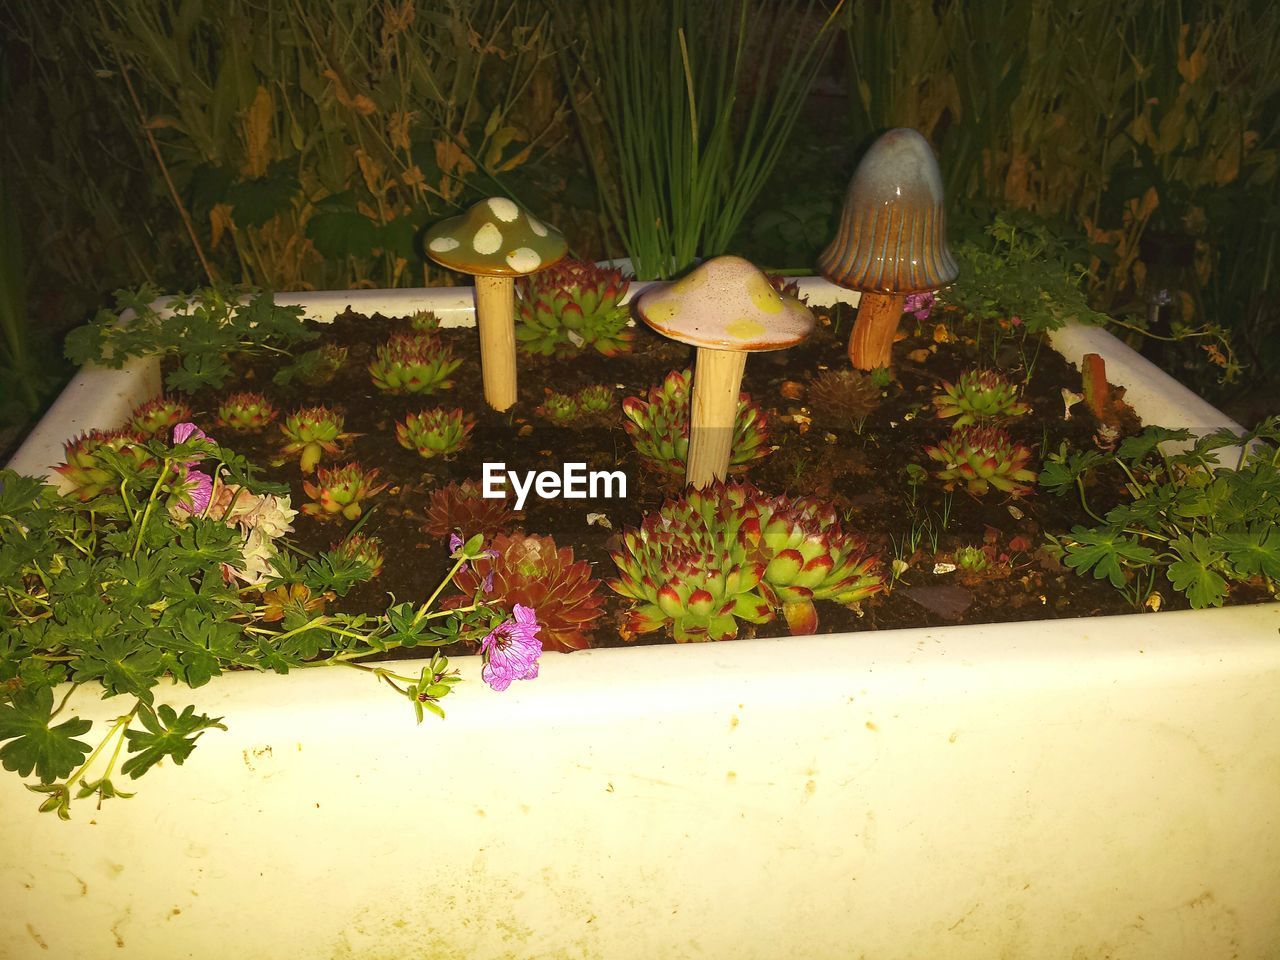 Artificial mushrooms and plants in garden